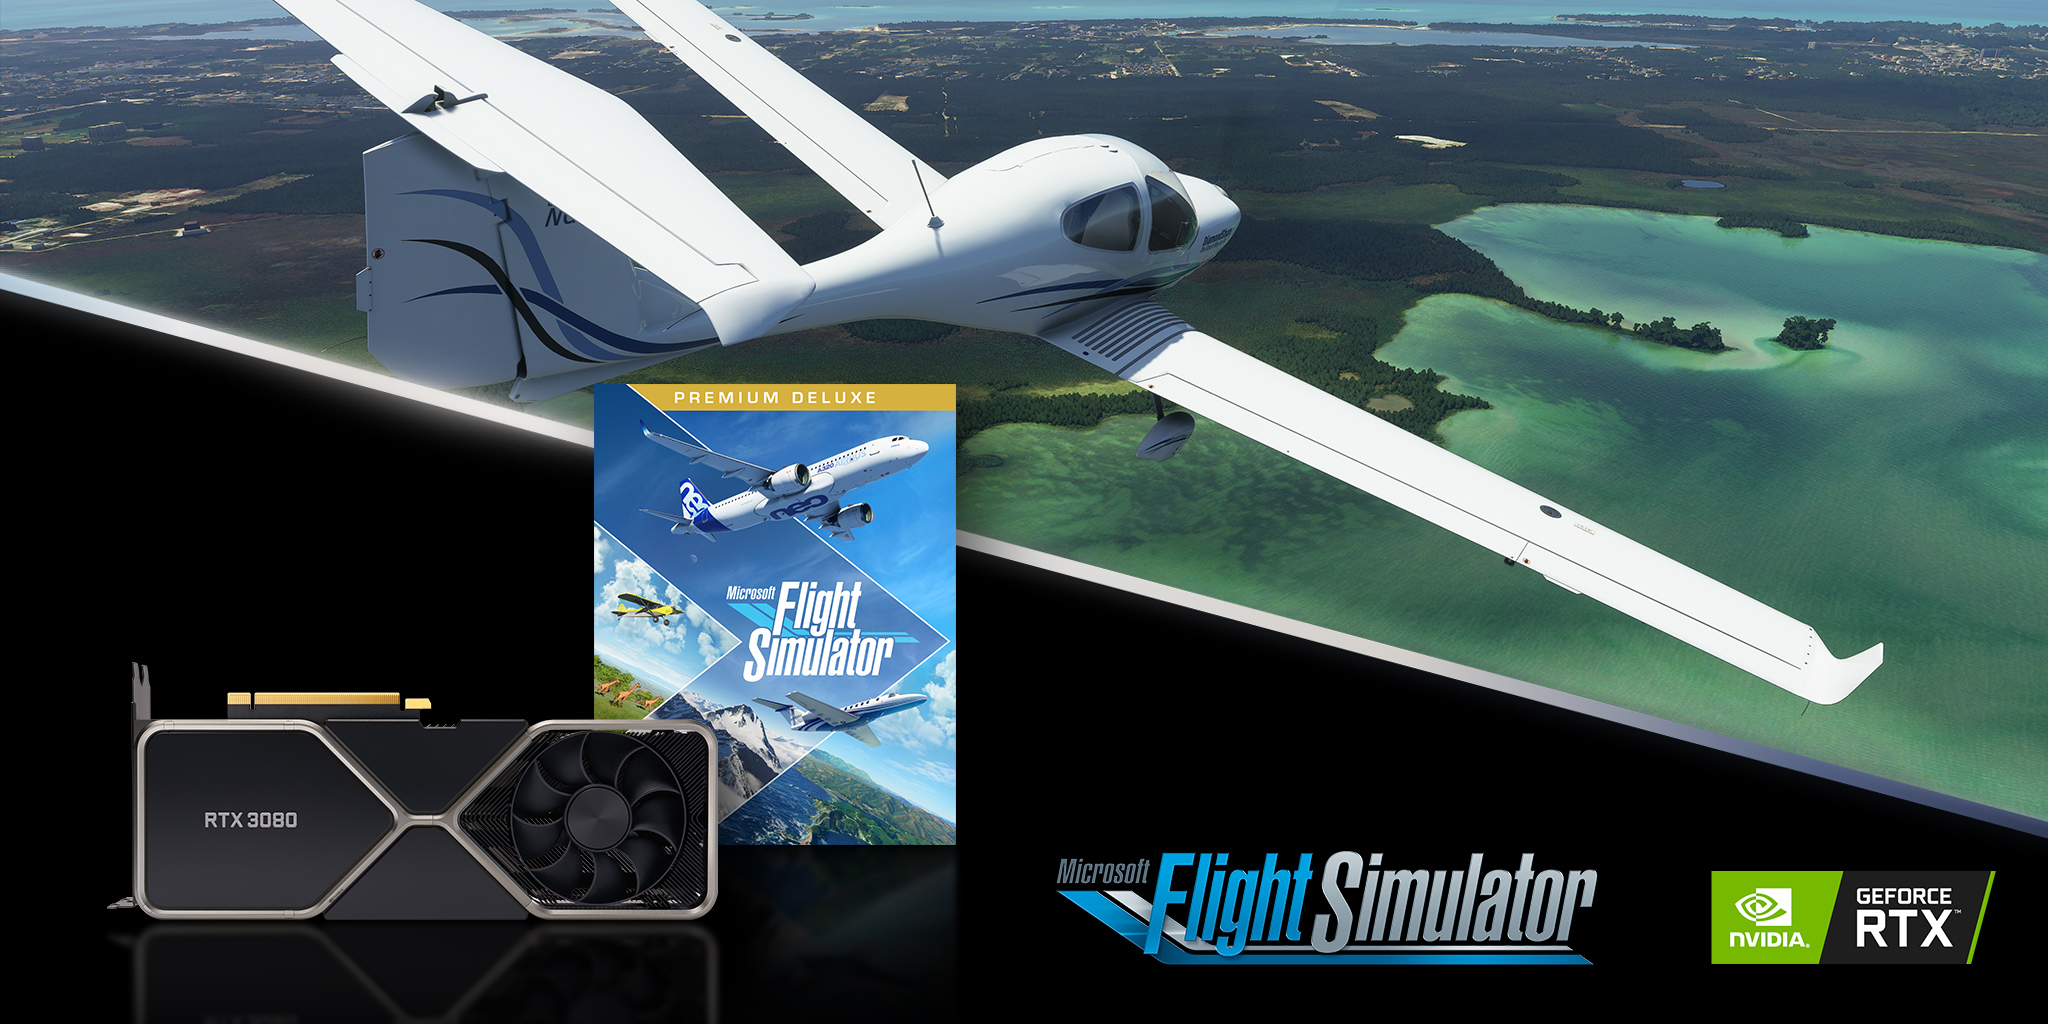 VR is a 'very high' priority for the Microsoft Flight Simulator team